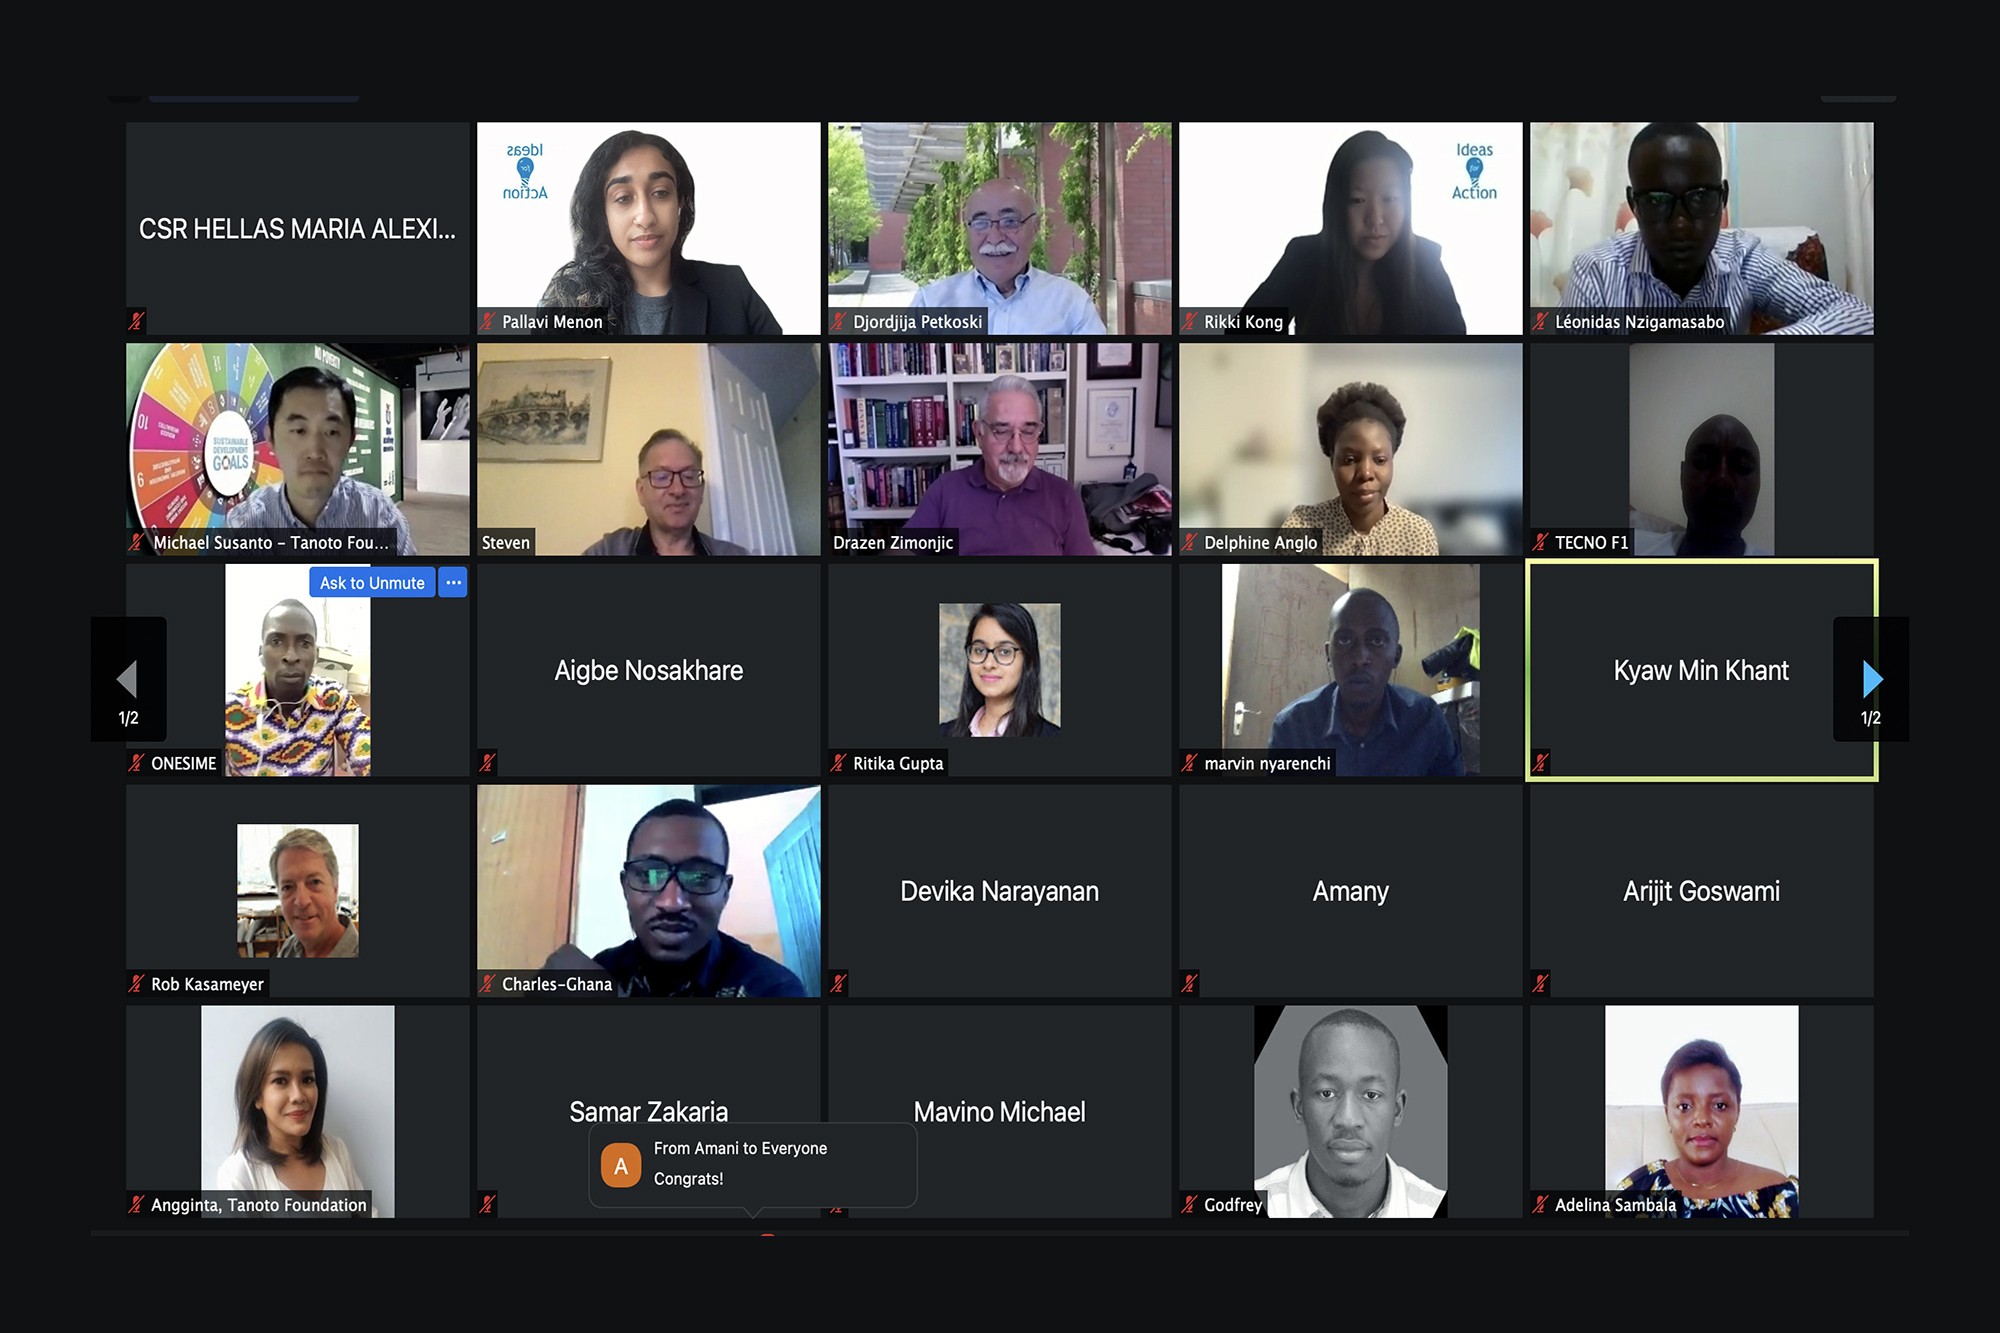 Screen shot of virtual meeting with various people on camera and some off-camera.